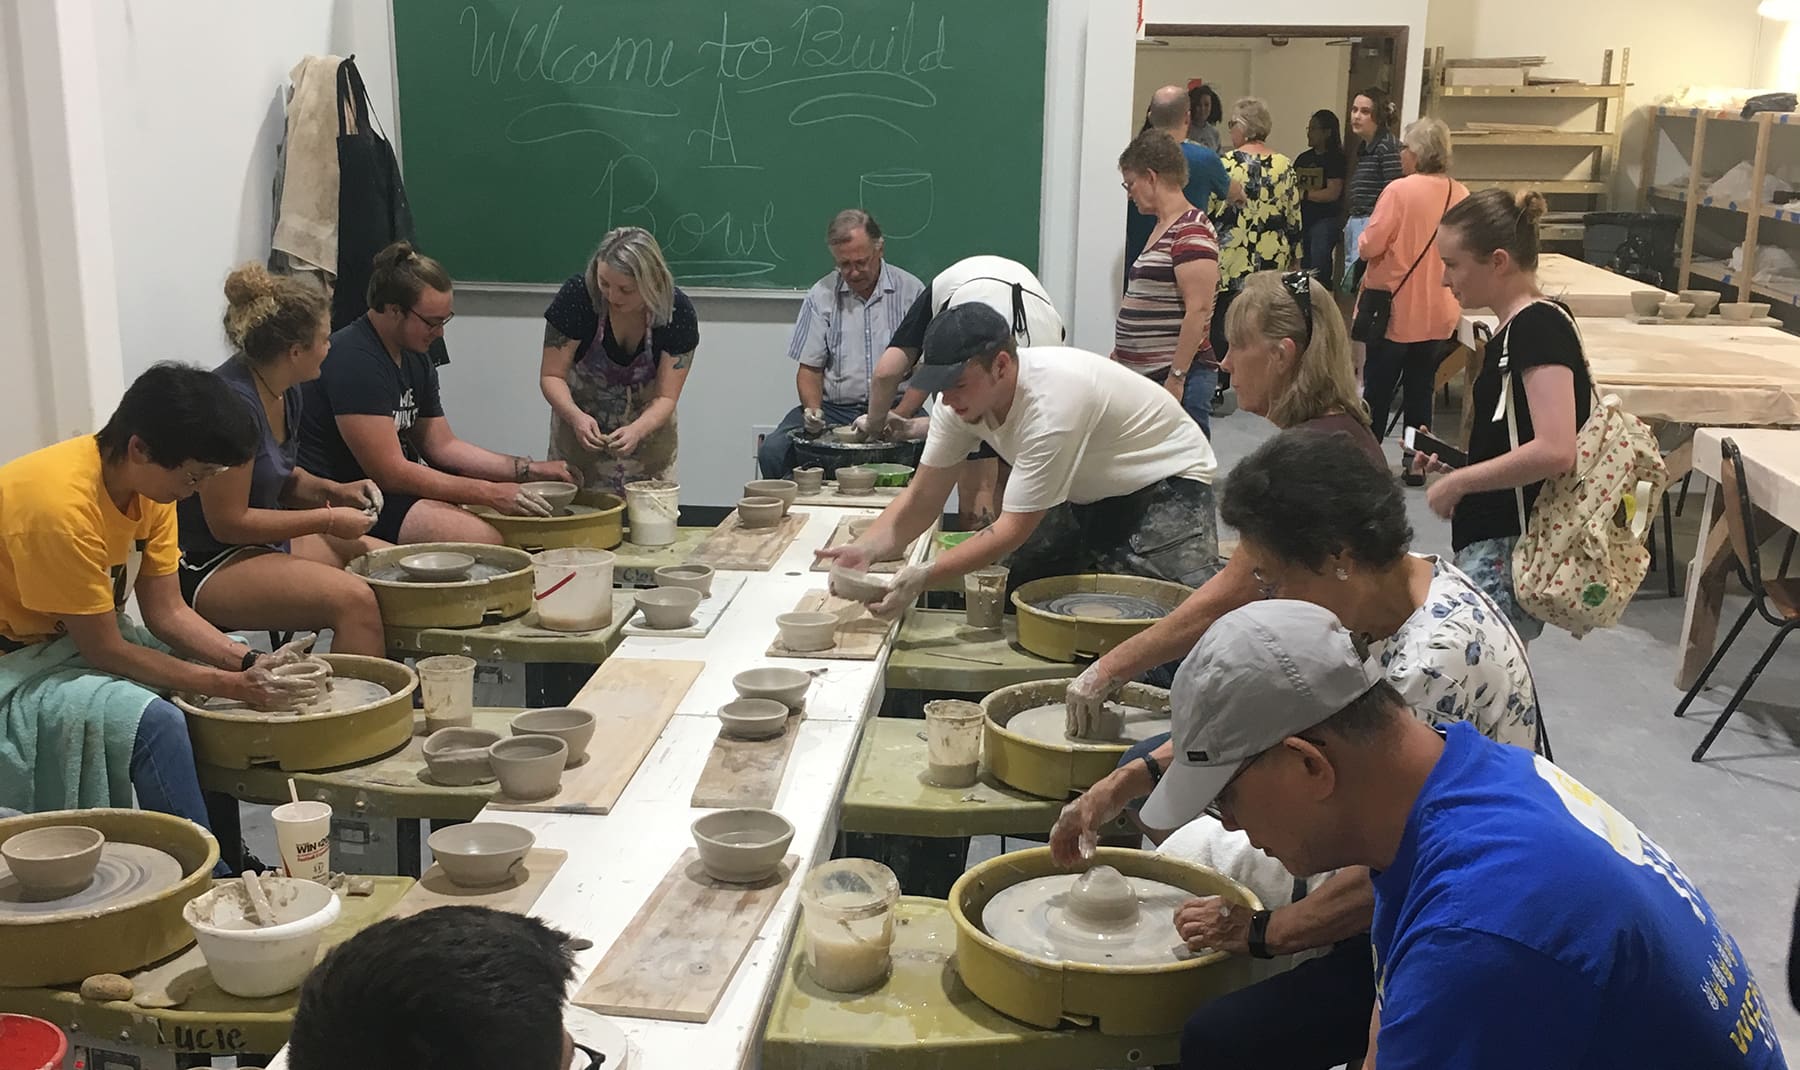 A group of people throw and handbuild ceramic bowls around a table. A chalkboard says, "Welcome to Build A Bowl."